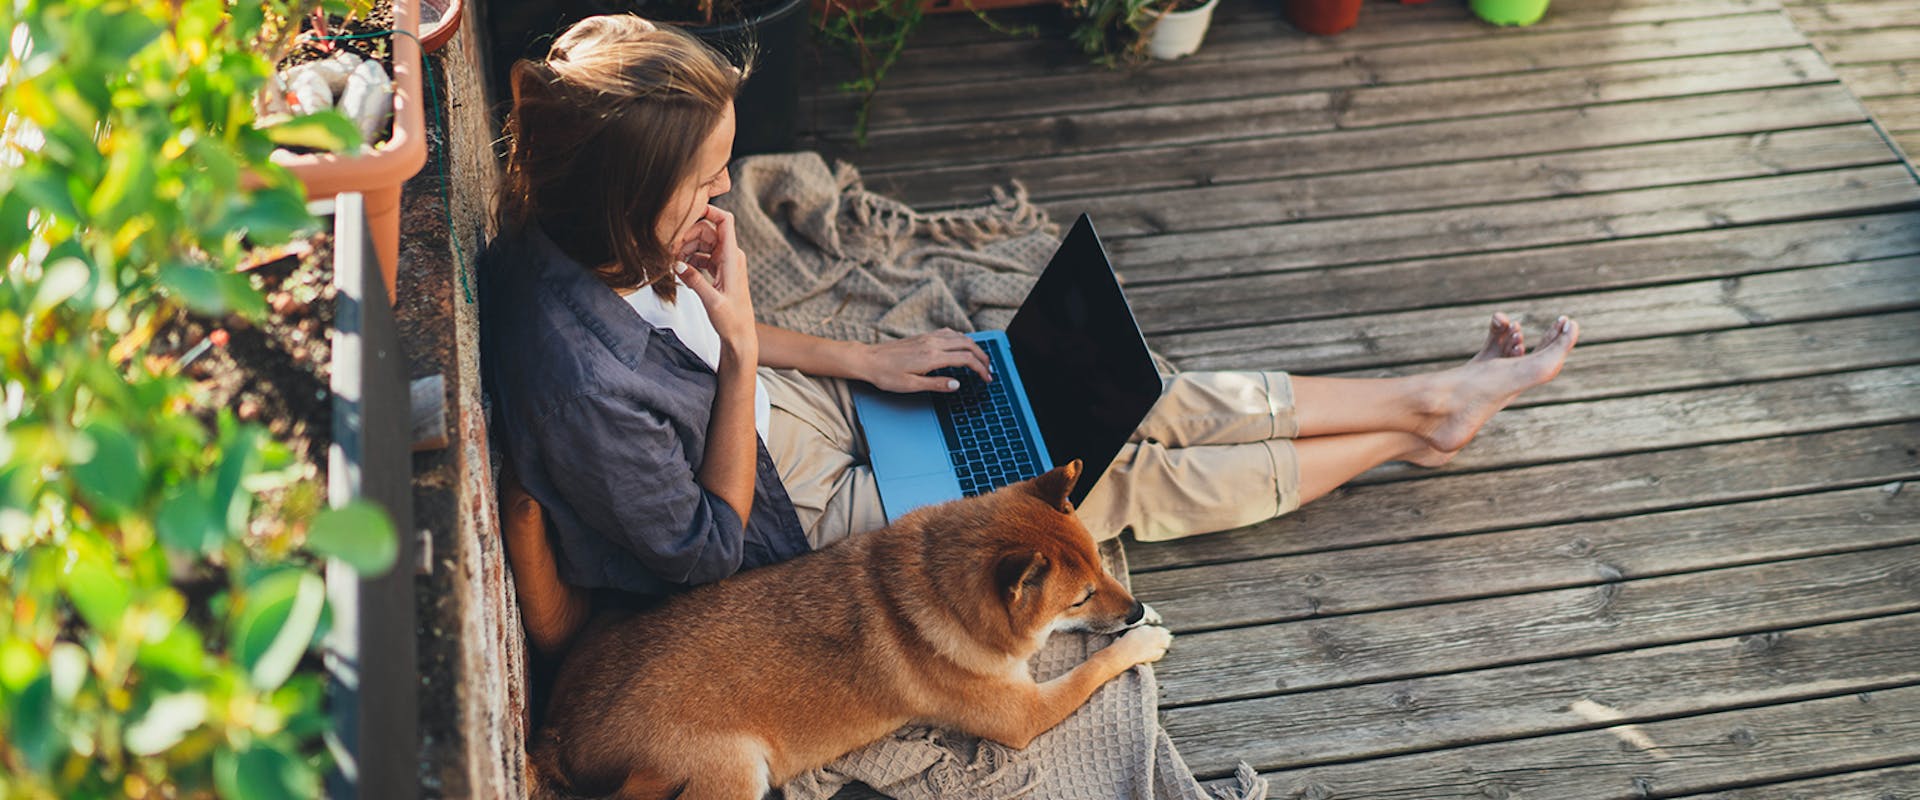 A woman sitting on her laptop in a sun-lit garden, with a small dog sitting at her side